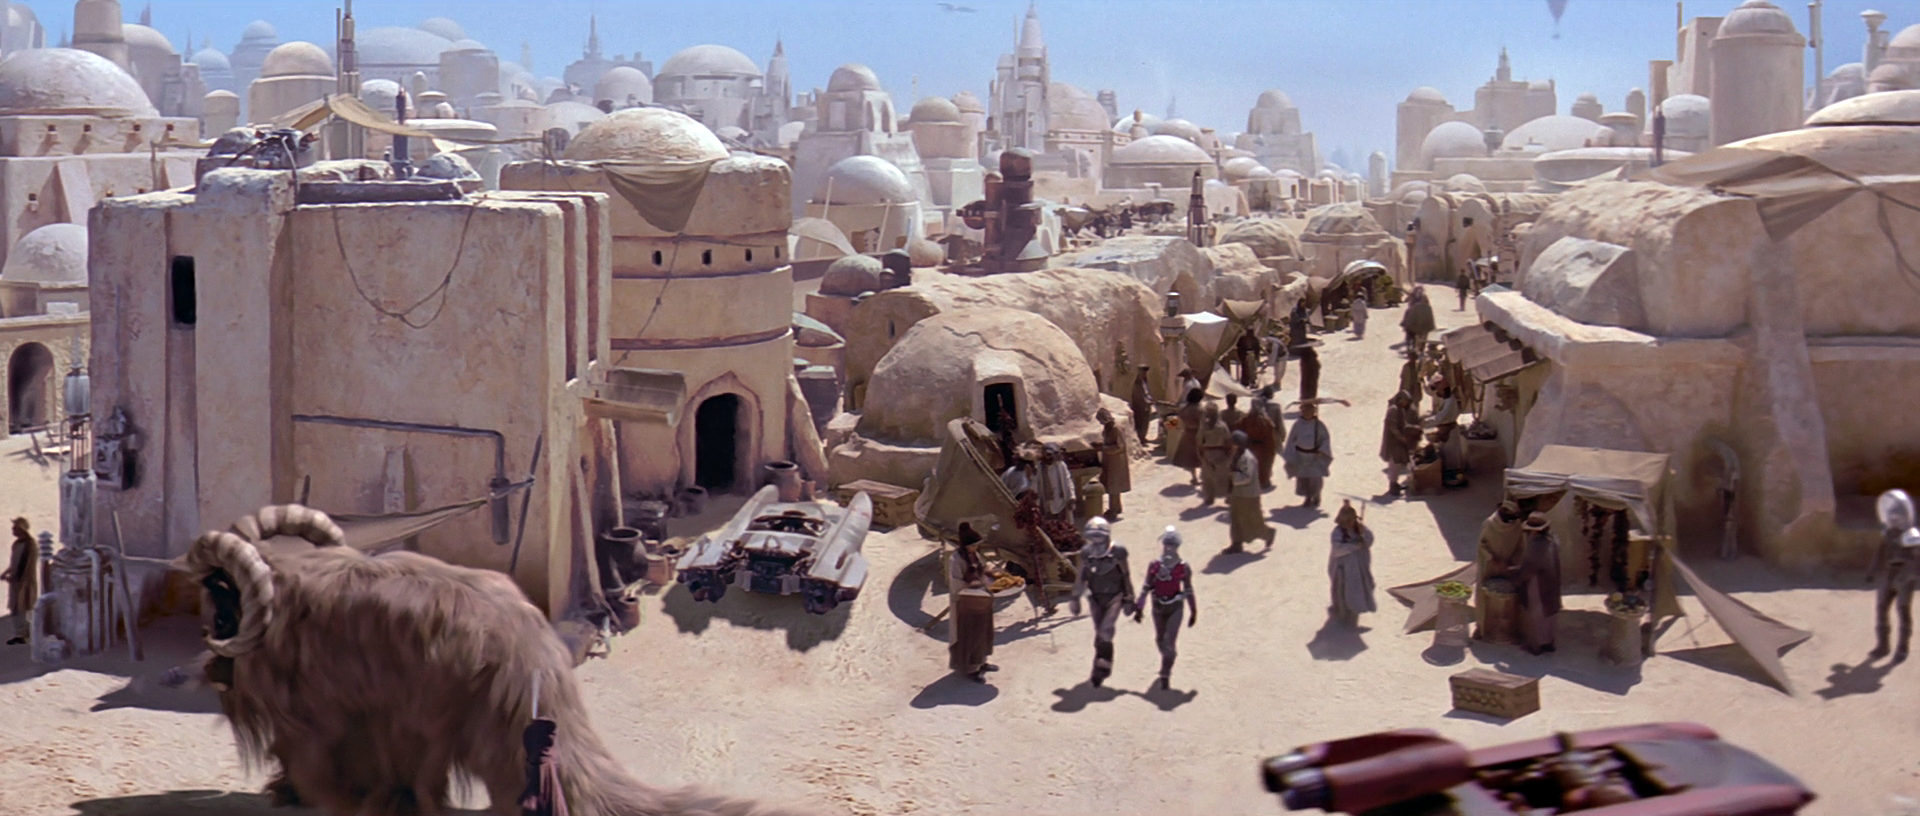 Free download How many liberty primesFalloutwould be needed to take a scarab [1920x816] for your Desktop, Mobile & Tablet. Explore Star Wars Mos Eisley Background. Star Wars Mos Eisley